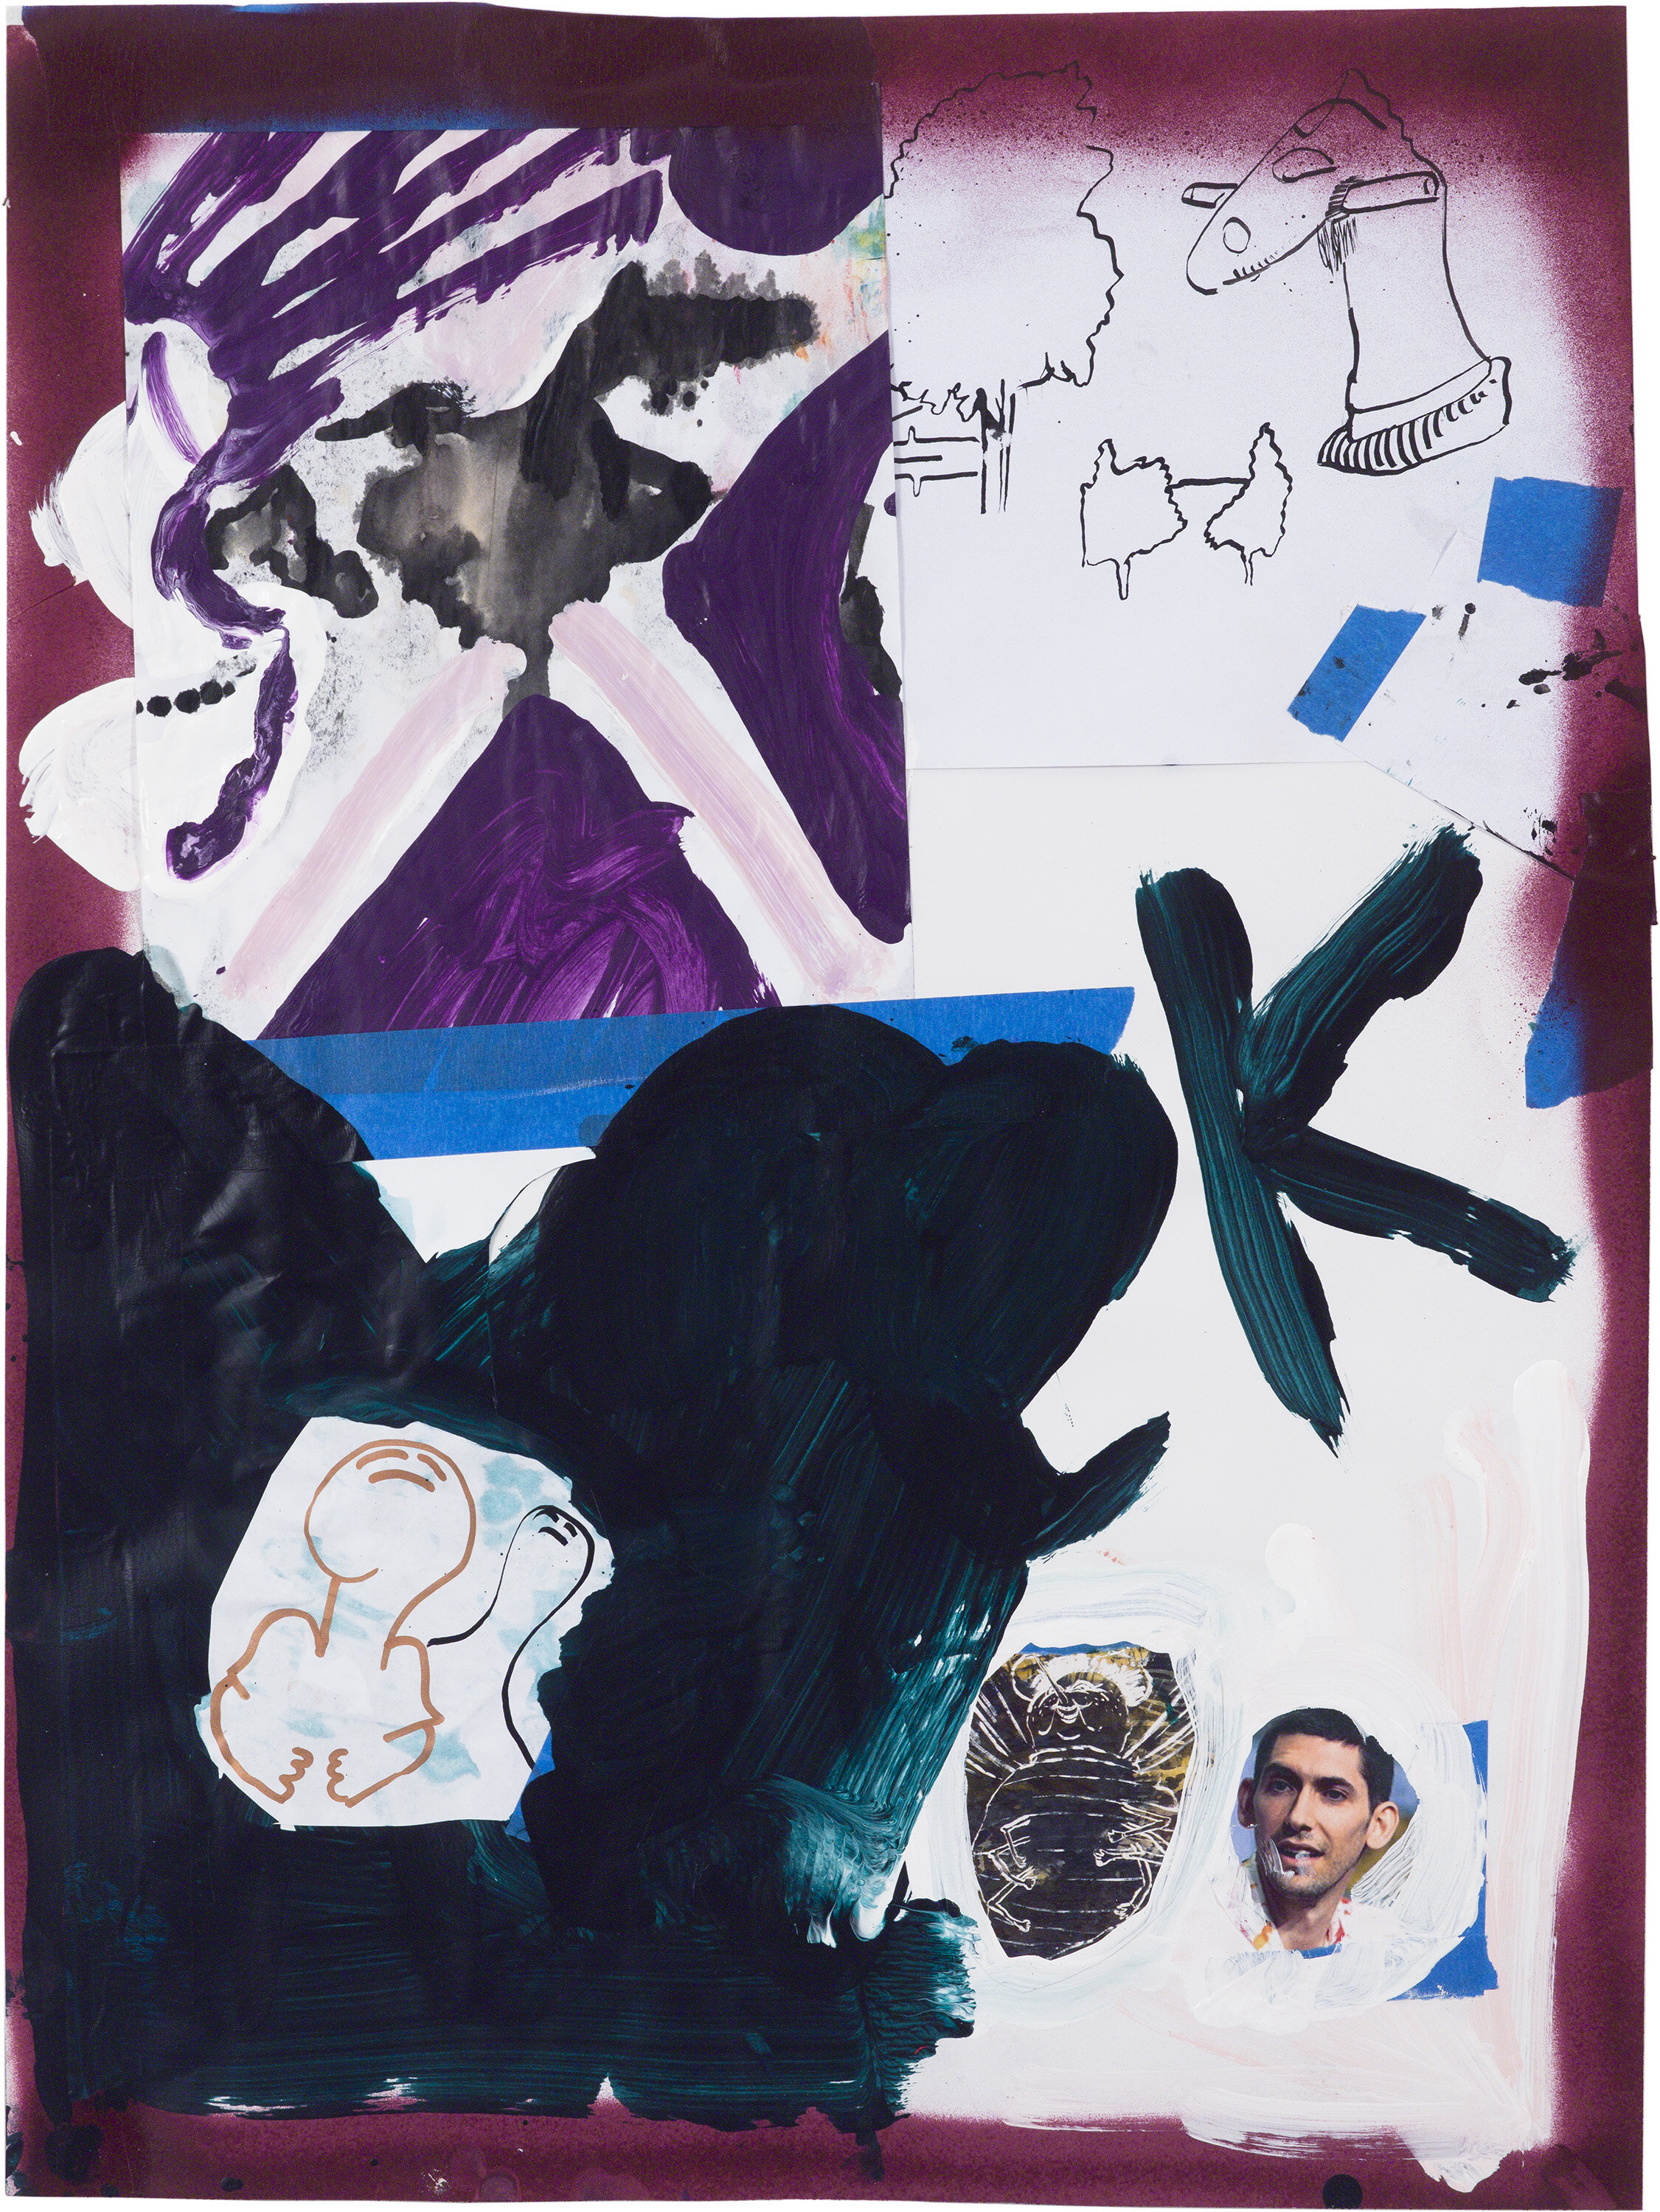  Drew Beattie and Ben Shepard  DBBS-DRW-2019-345   2019 acrylic, spray paint, marker, tape and collage on paper  24 x 18 inches 